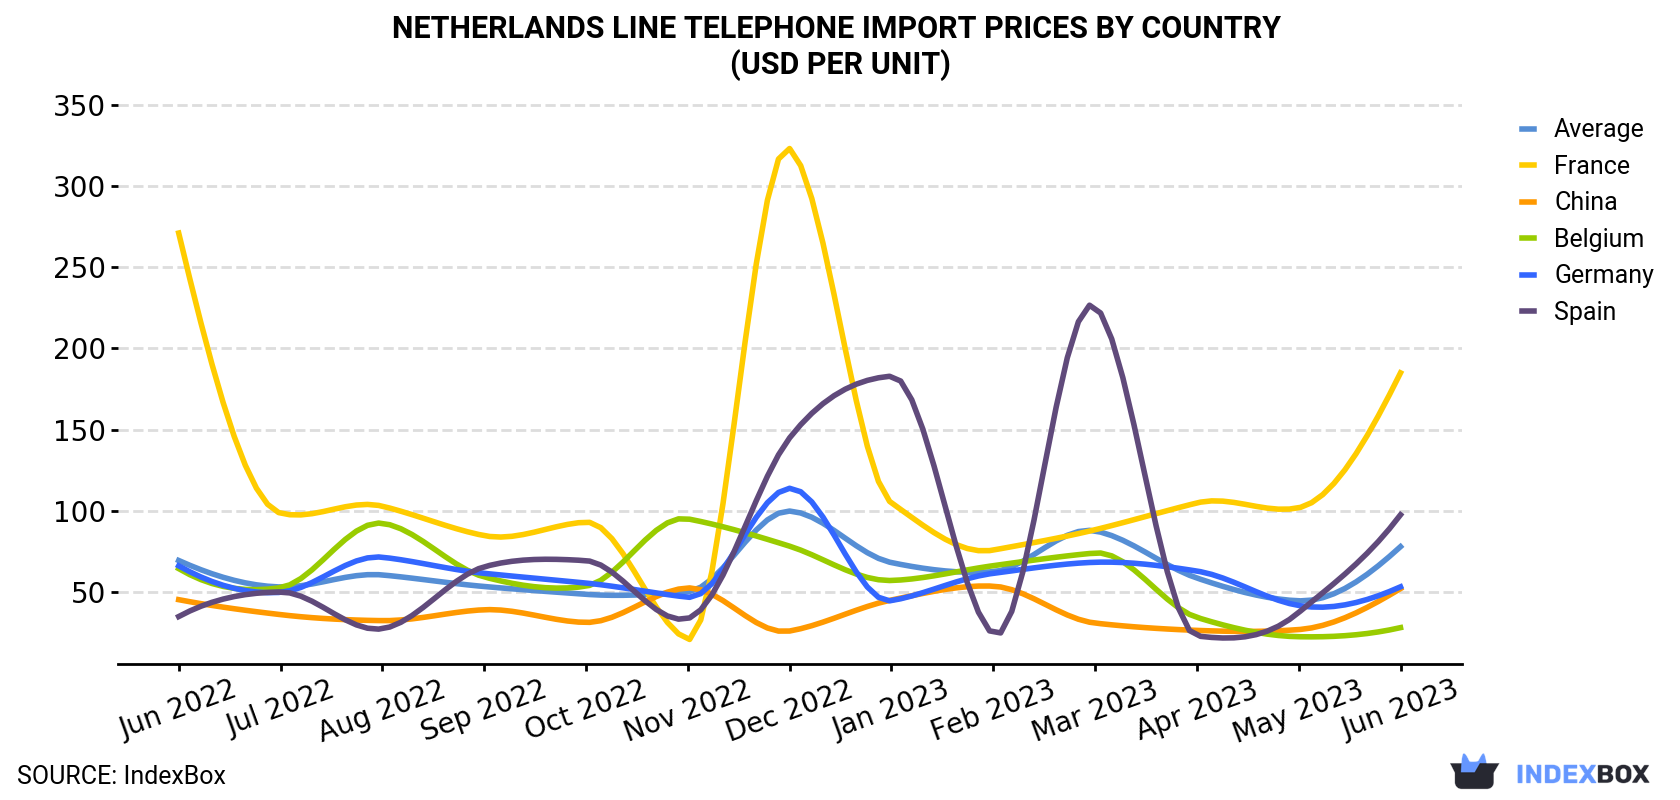 Netherlands Line Telephone Import Prices By Country (USD Per Unit)